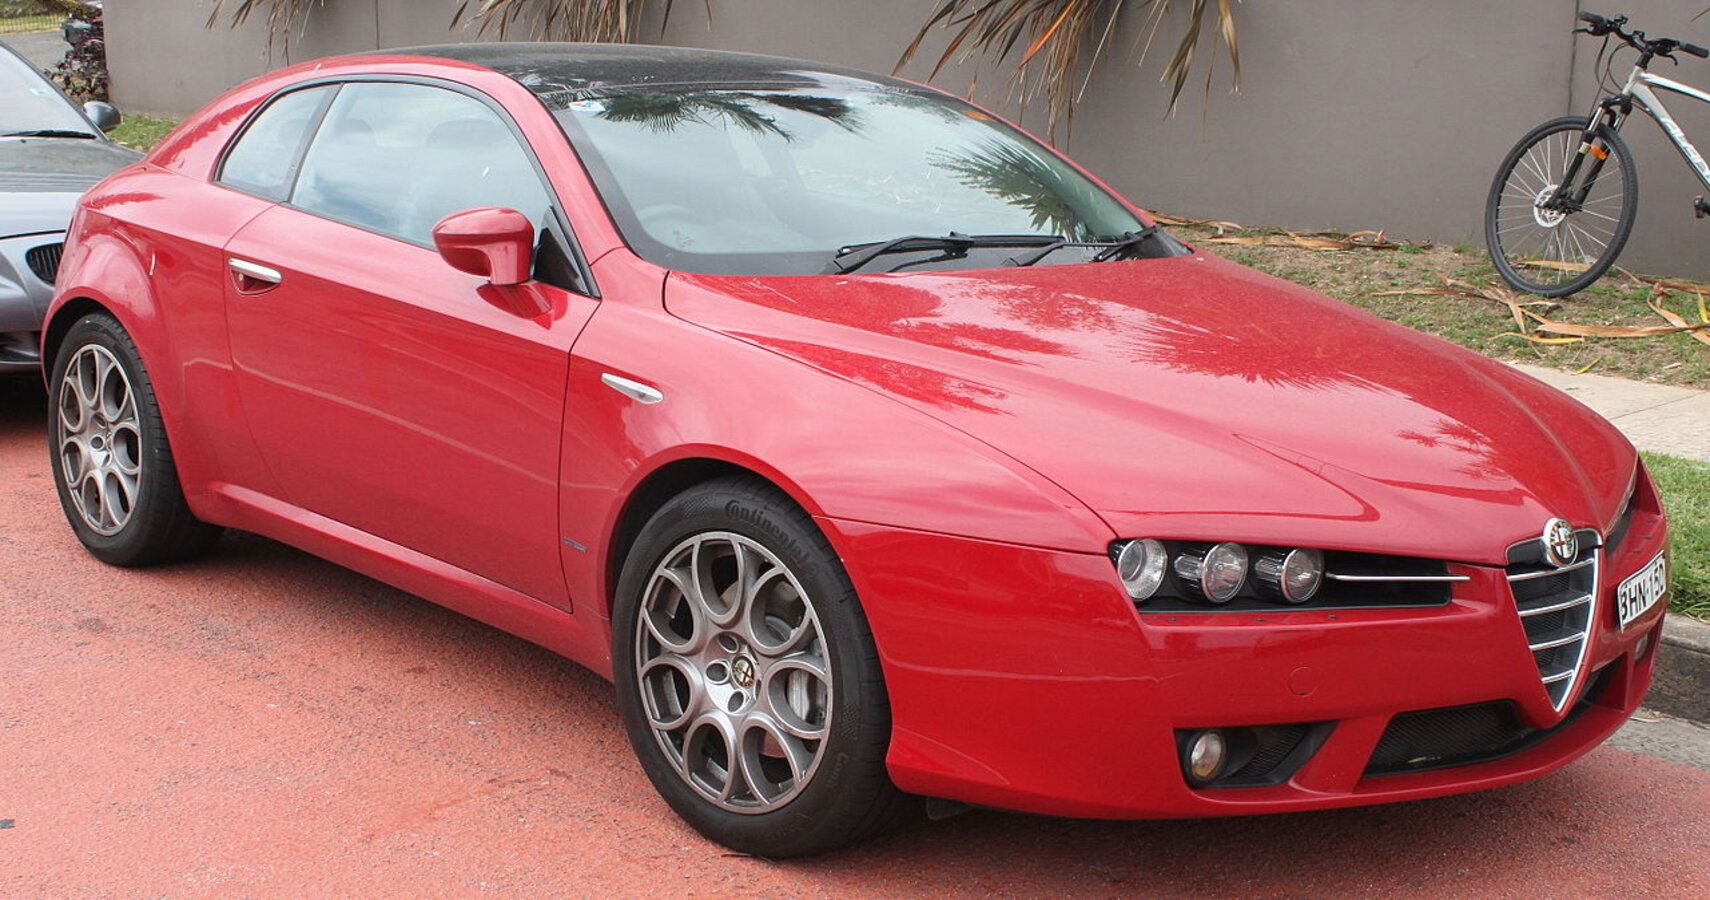 The Alfa Romeo Brera is one of the most celebrated sports cars